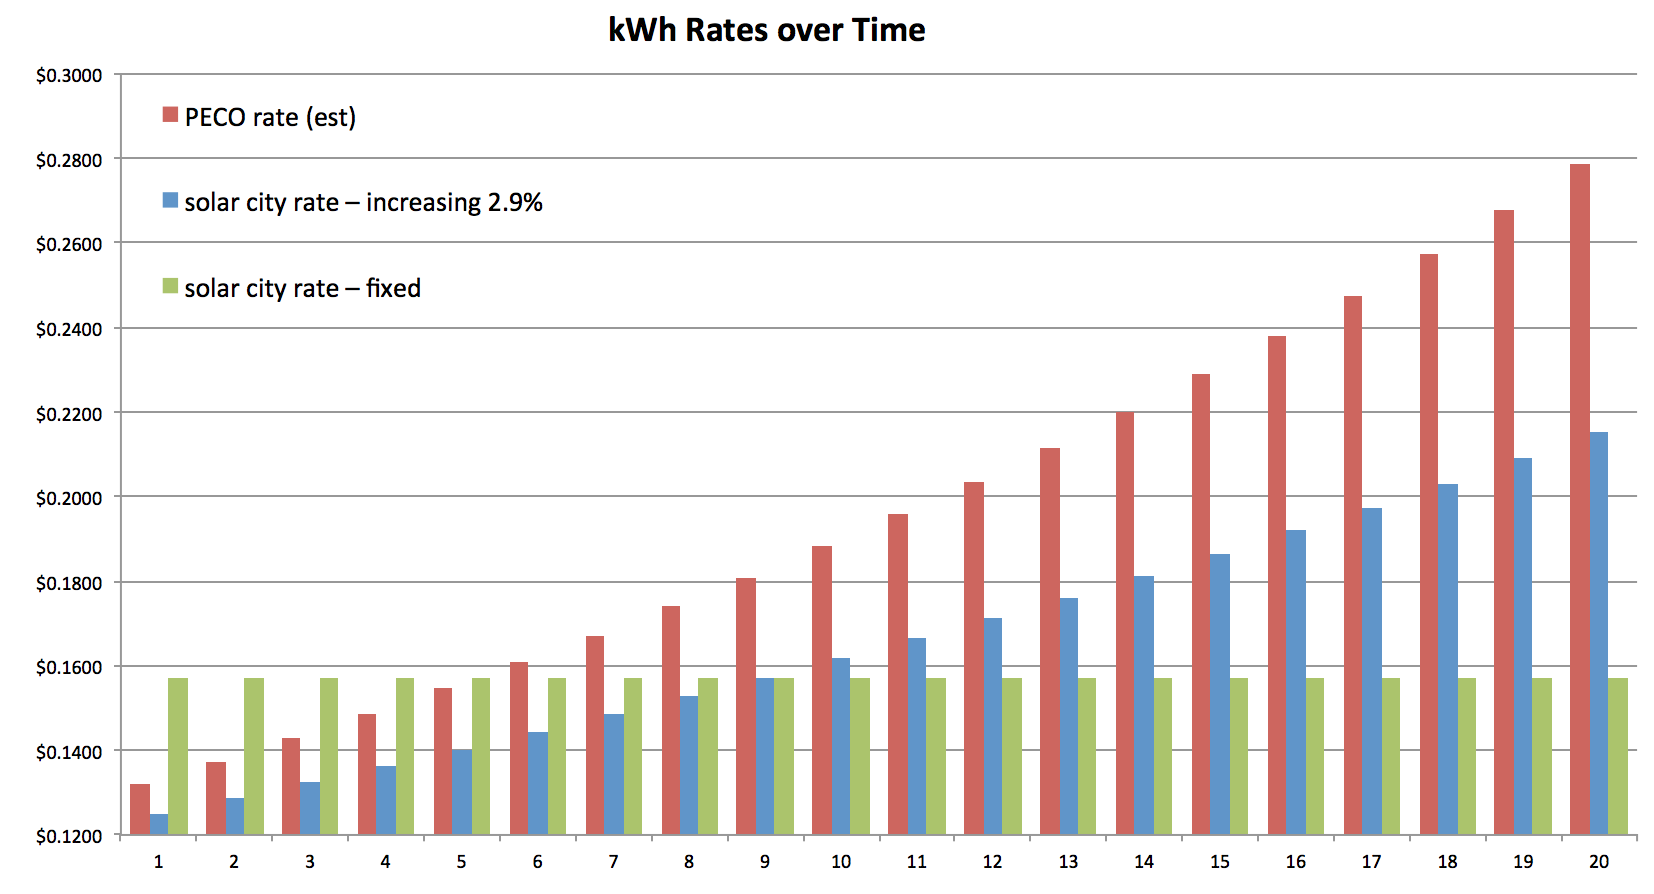 Solar City Tesla rates (actual) vs Peco rates (projection) over the next 20 years